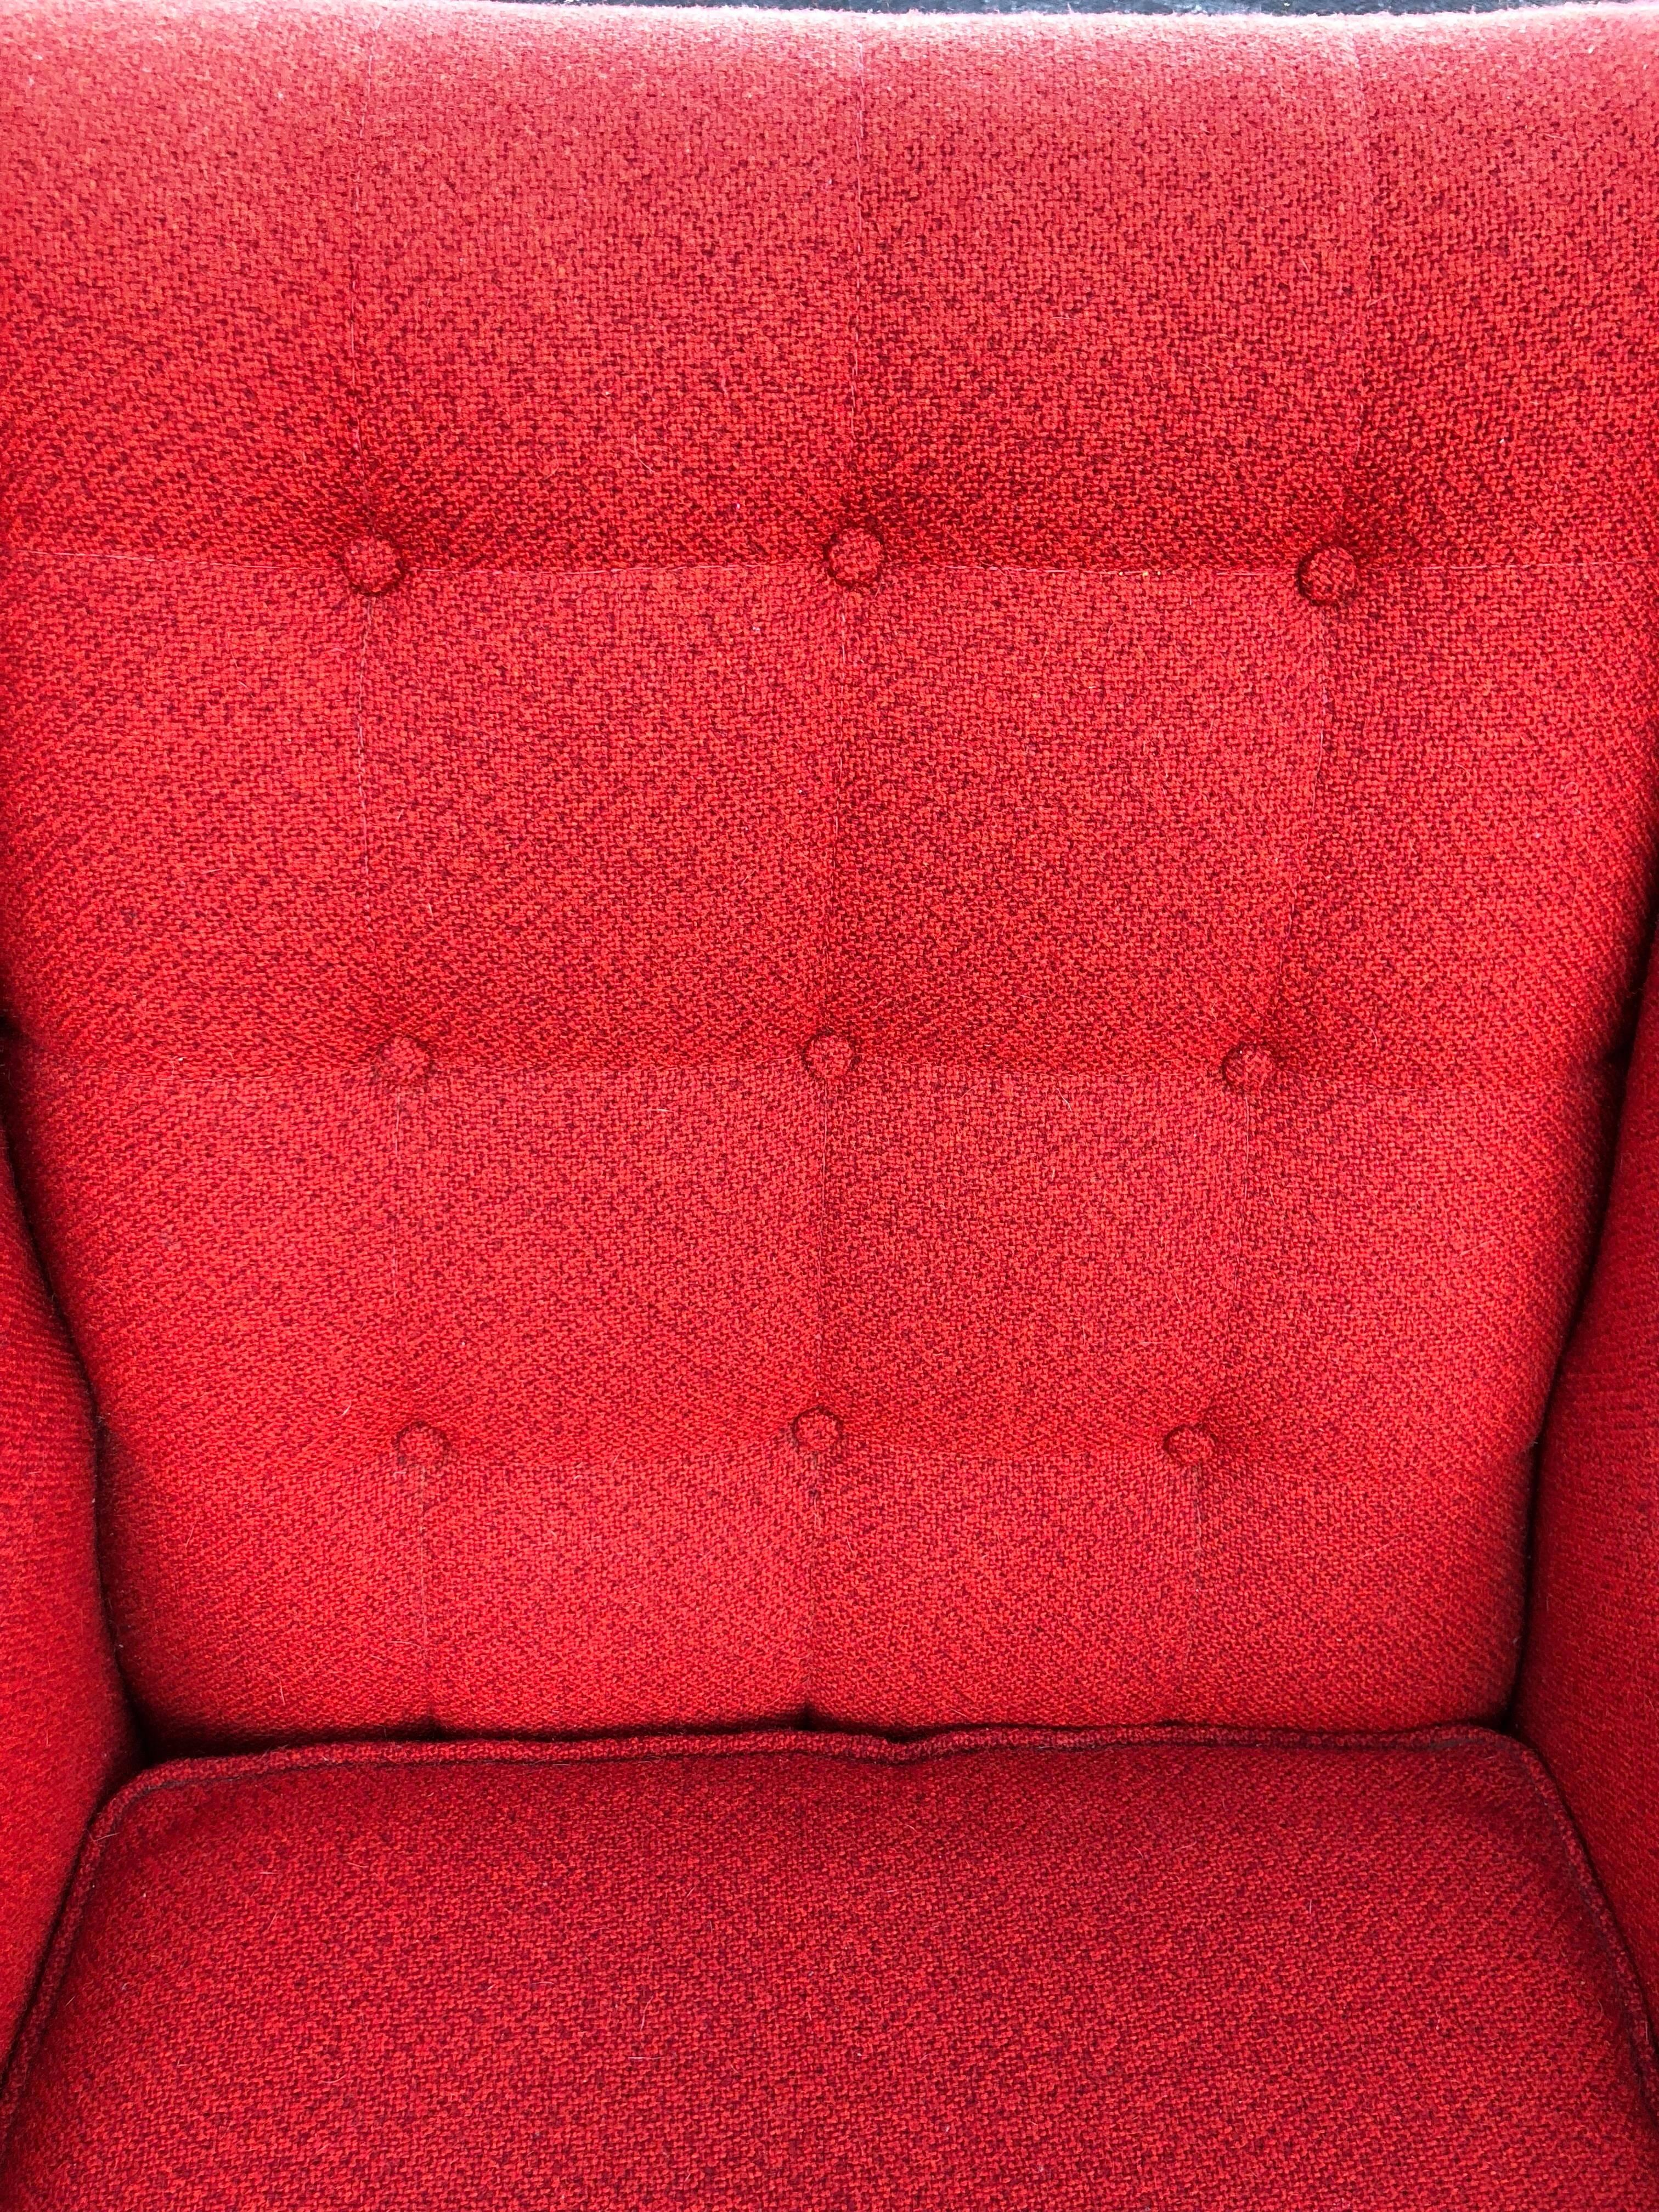 Mid-Century Lounge Chair in Red 2